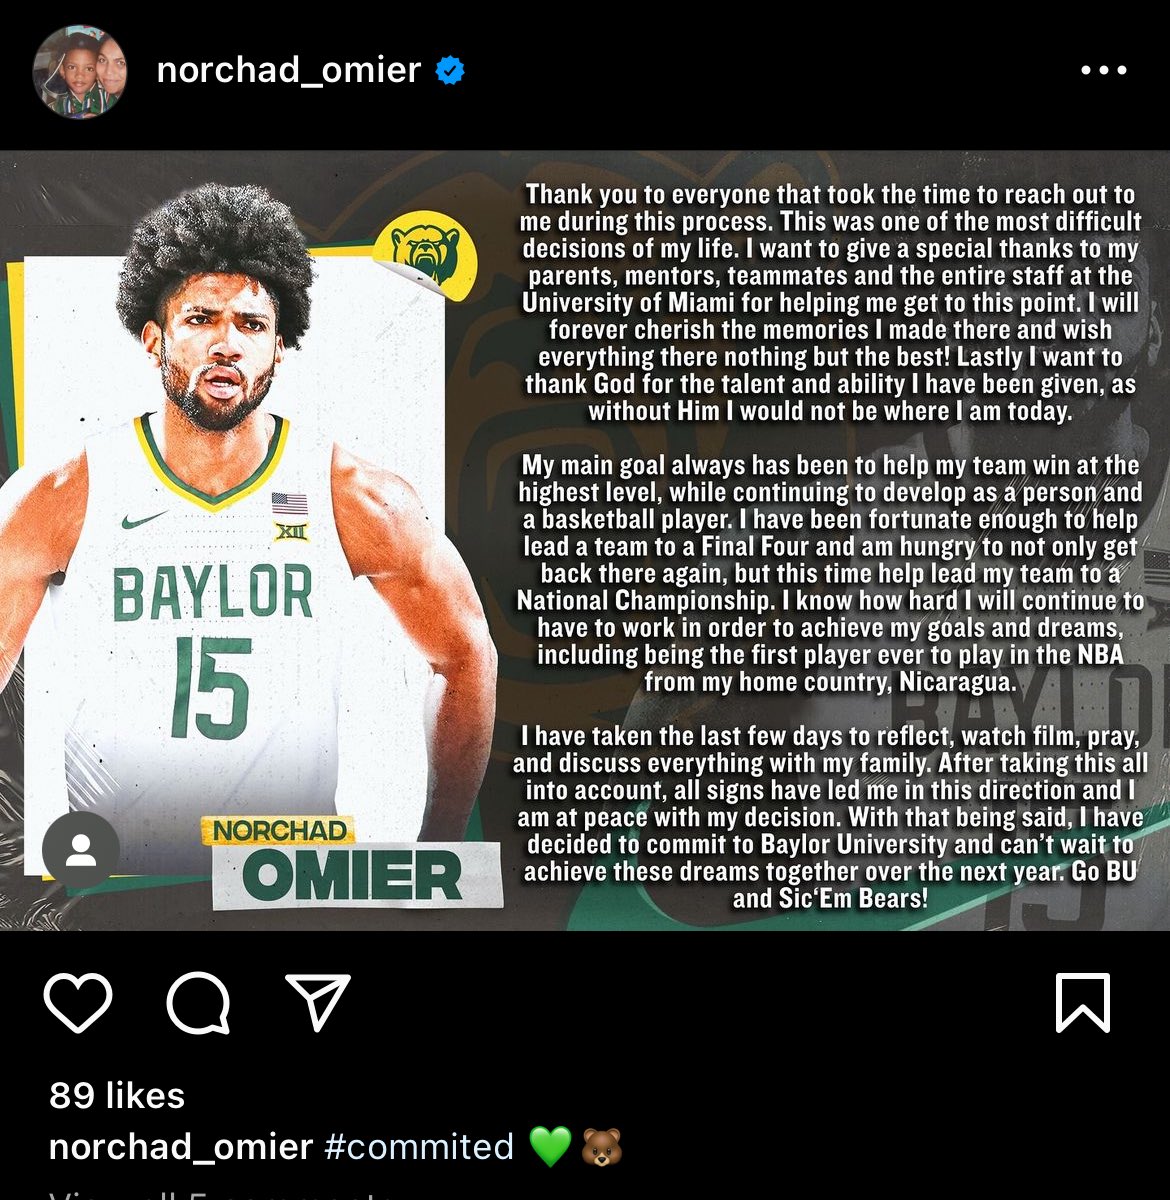 Baylor lands Miami transfer Norchad Omier